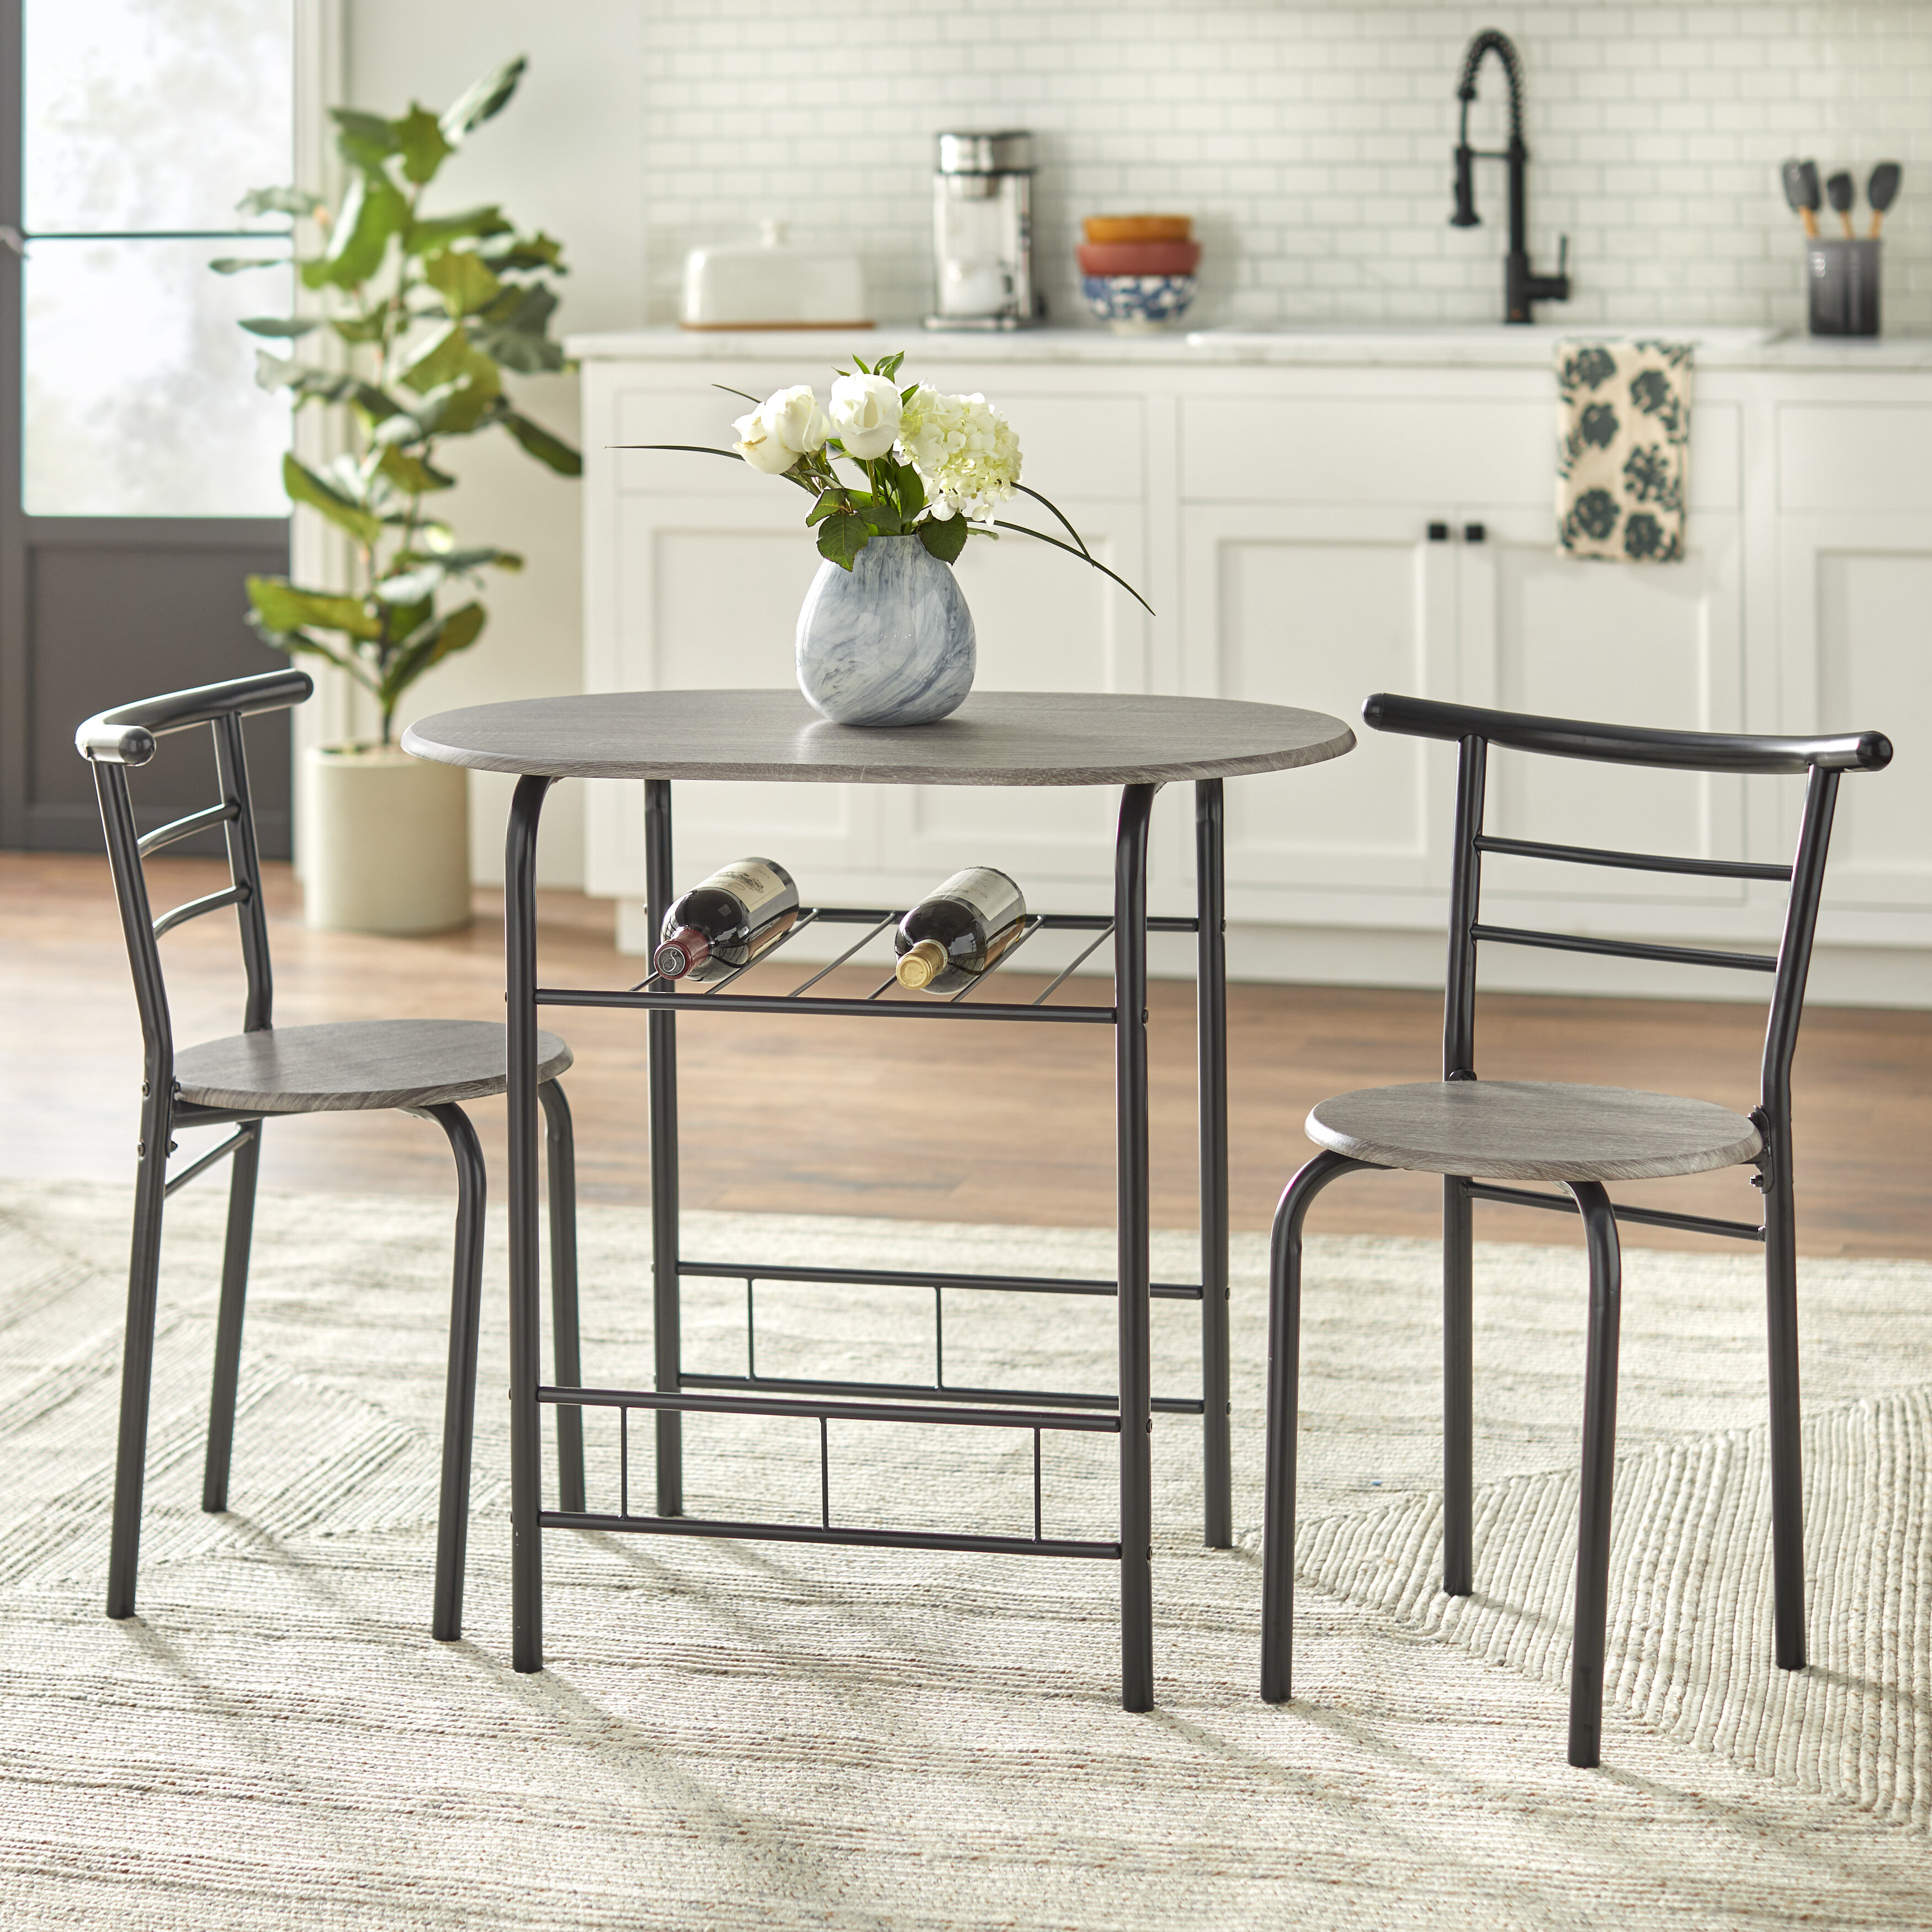 Pack of Two Dining Kitchen Table Chairs Black Leather Solid Oak Legs